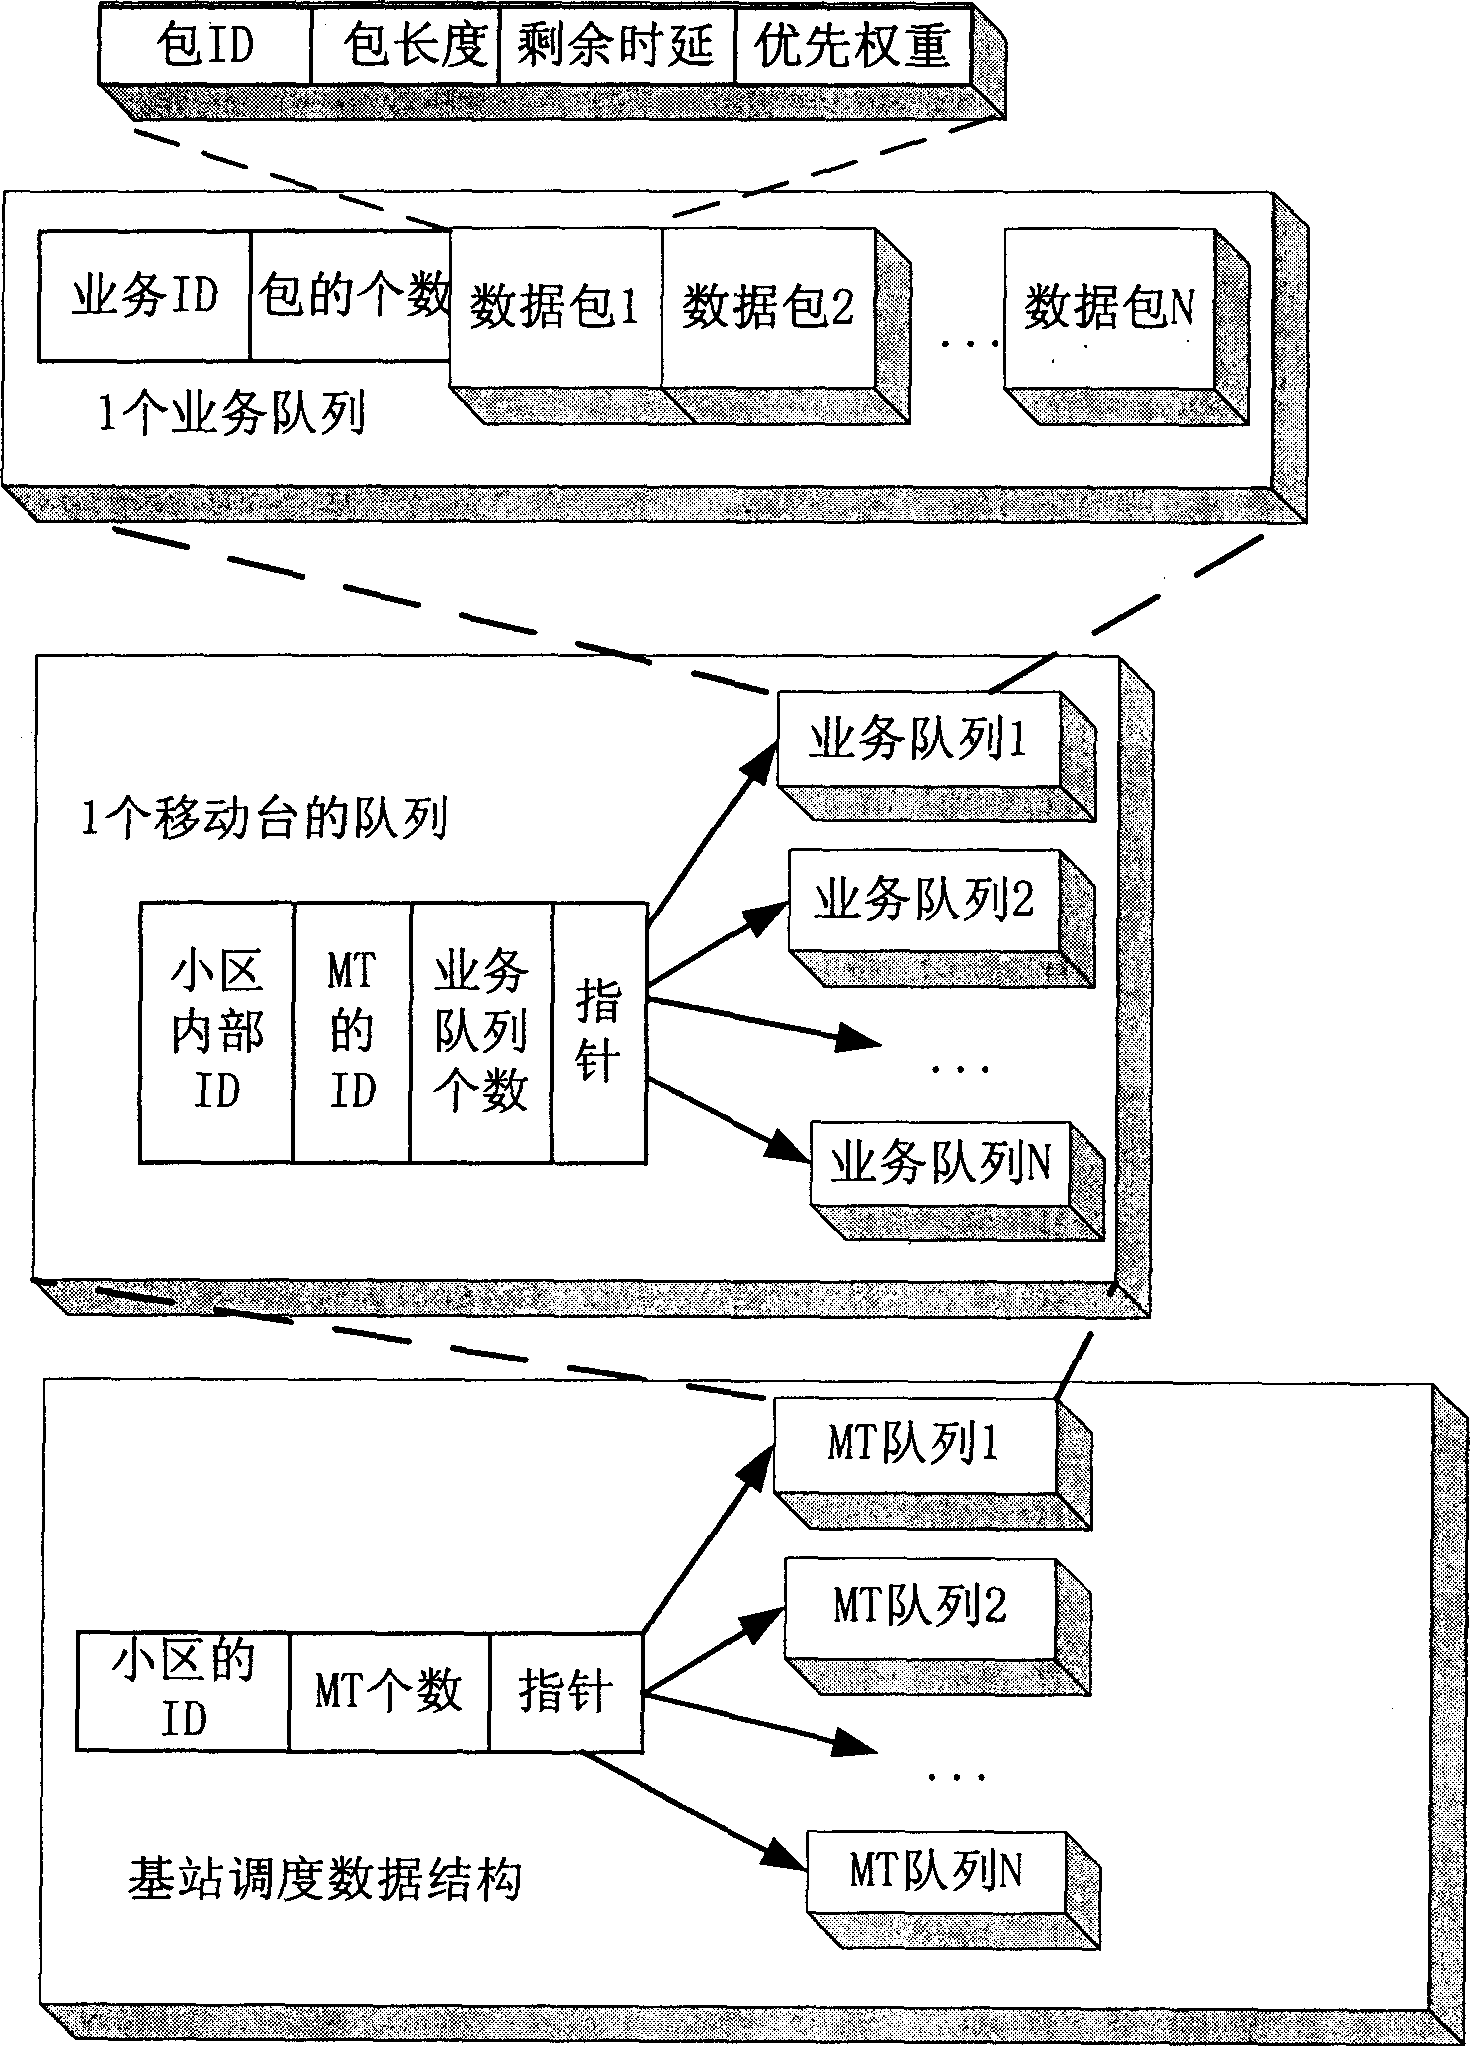 Scheduling method for ensuring service quality of real time operation in OFDM